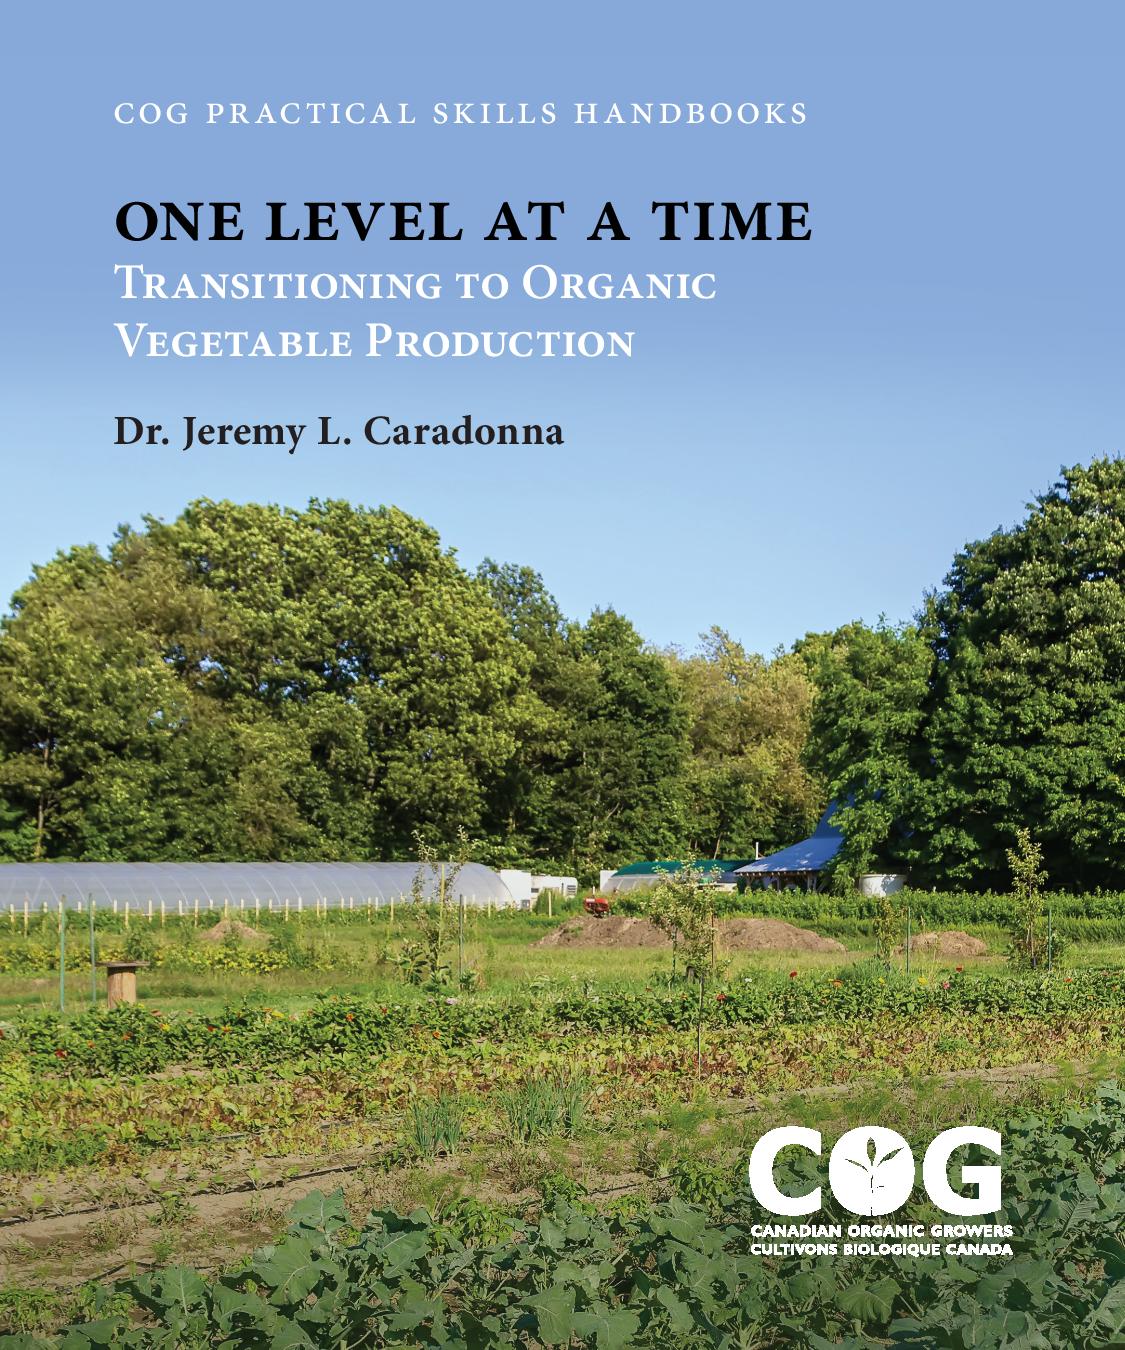 One Level at a Time: Transitioning to Organic Vegetable Production